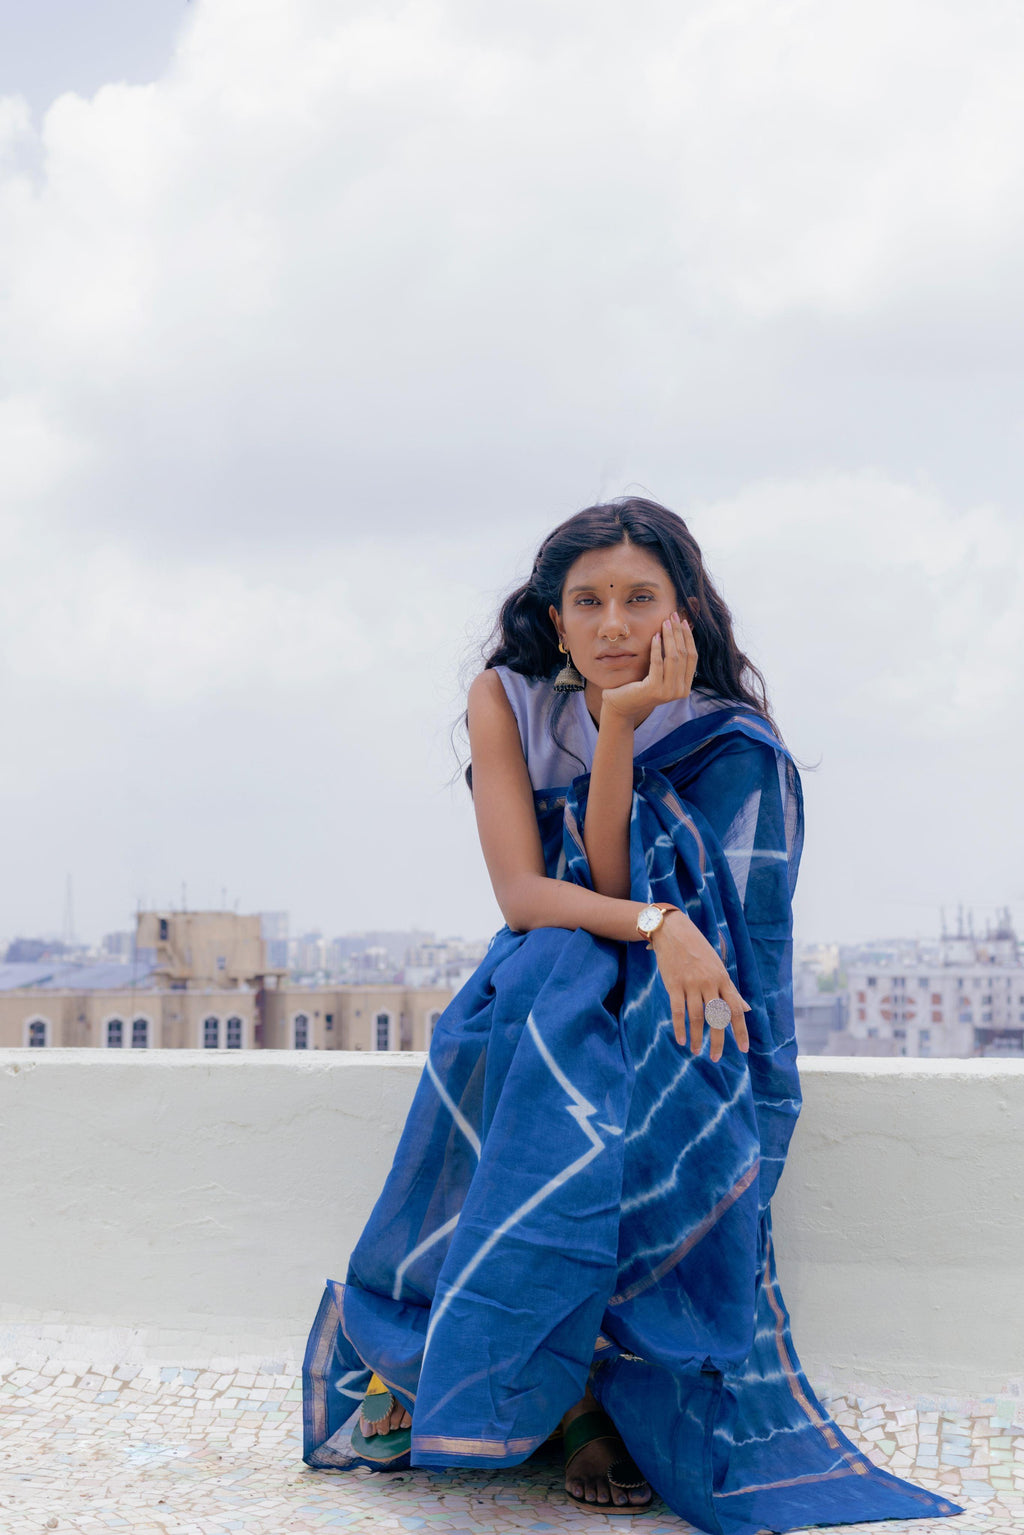 Harper's Bazaar India - “Teaming up the sari with separates, whether a denim  jacket of a graphic T-shirt has given young women the freedom to  personalise and wear it in any way